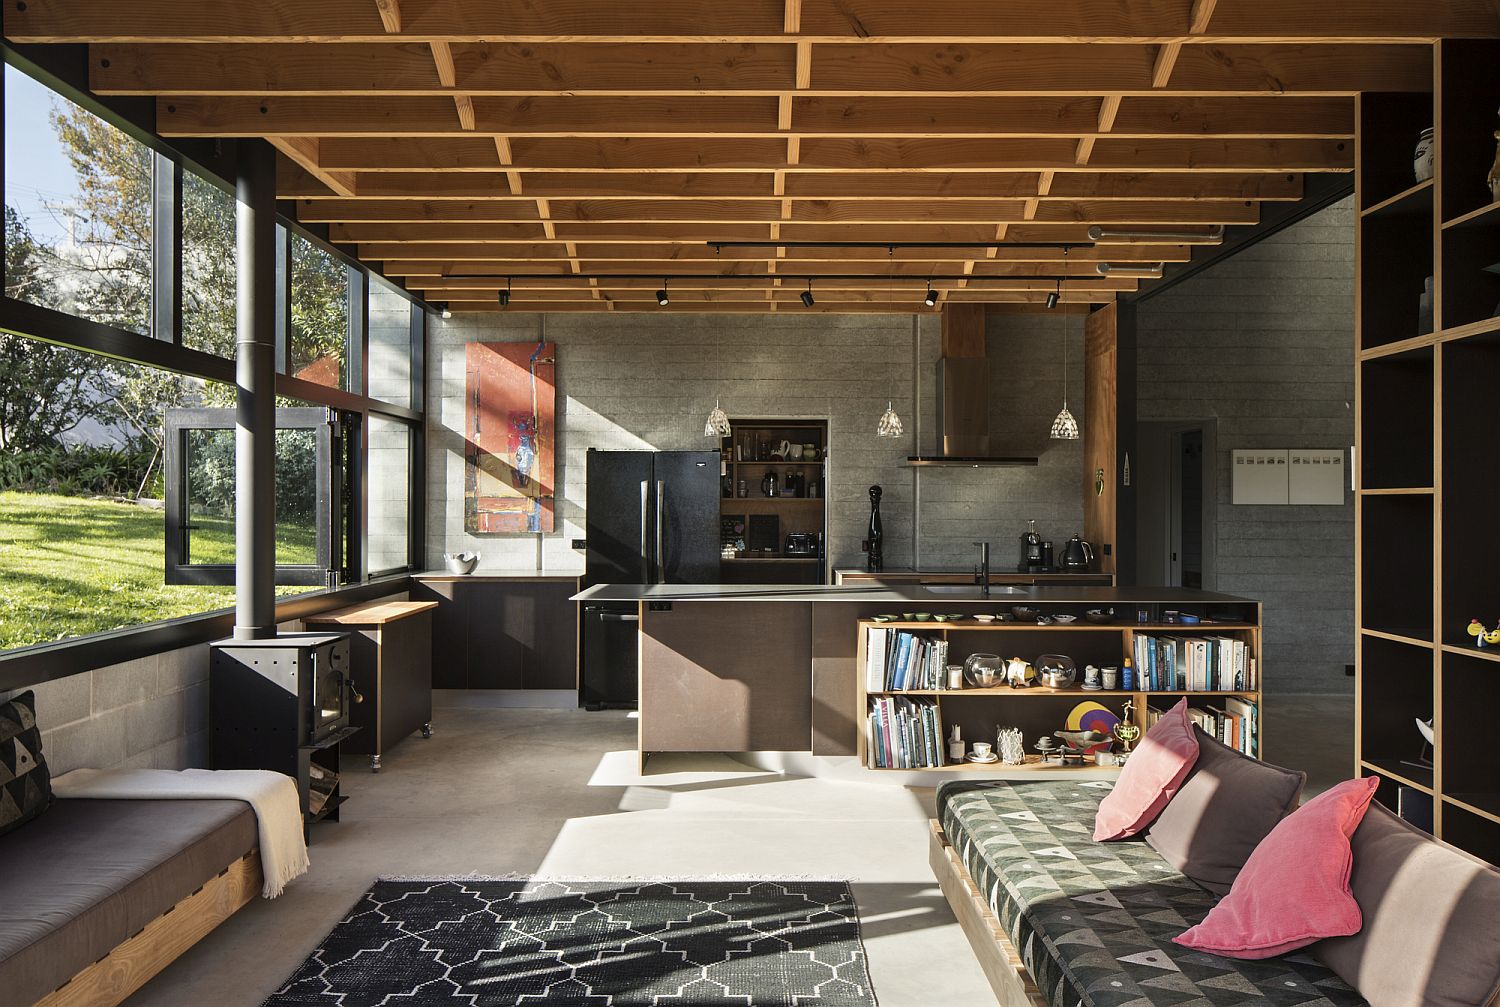 Sitting-area-and-kitchen-of-the-Modern-Bay-House-with-a-stylish-mezzanine-level-above